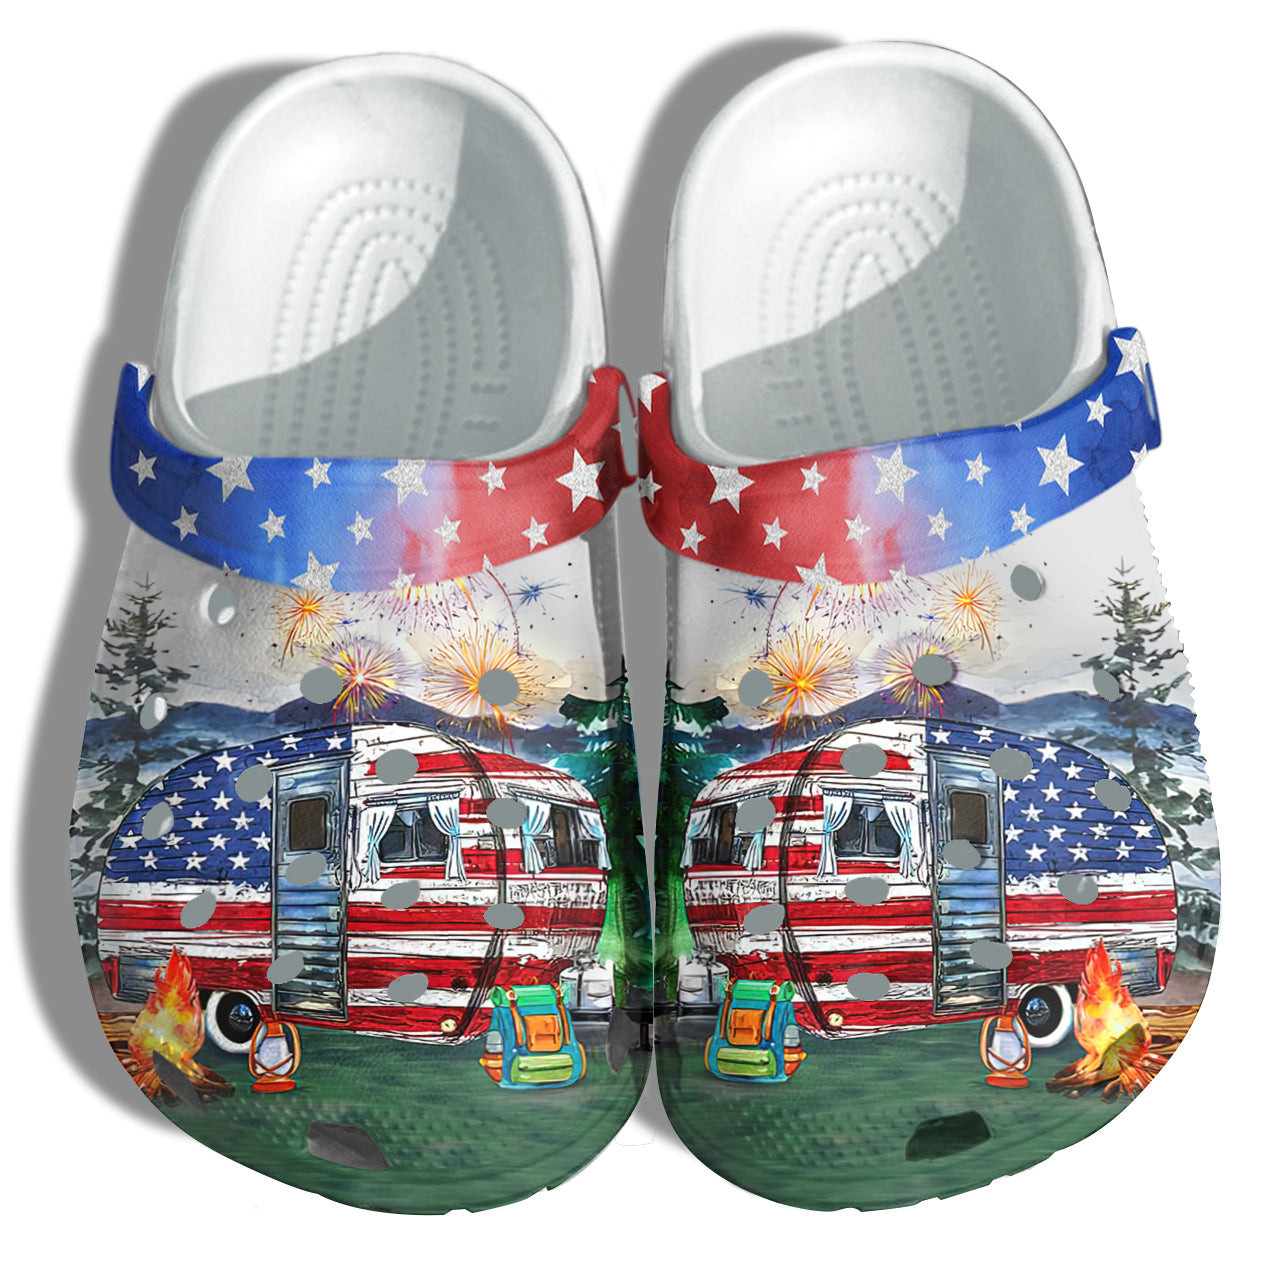 Camping Bus Happy New Year America Flag Crocs Clog Shoes Gift Women - Forest 4Th Of July Celebrate National Day Crocs Clog Shoes Birthday Gift